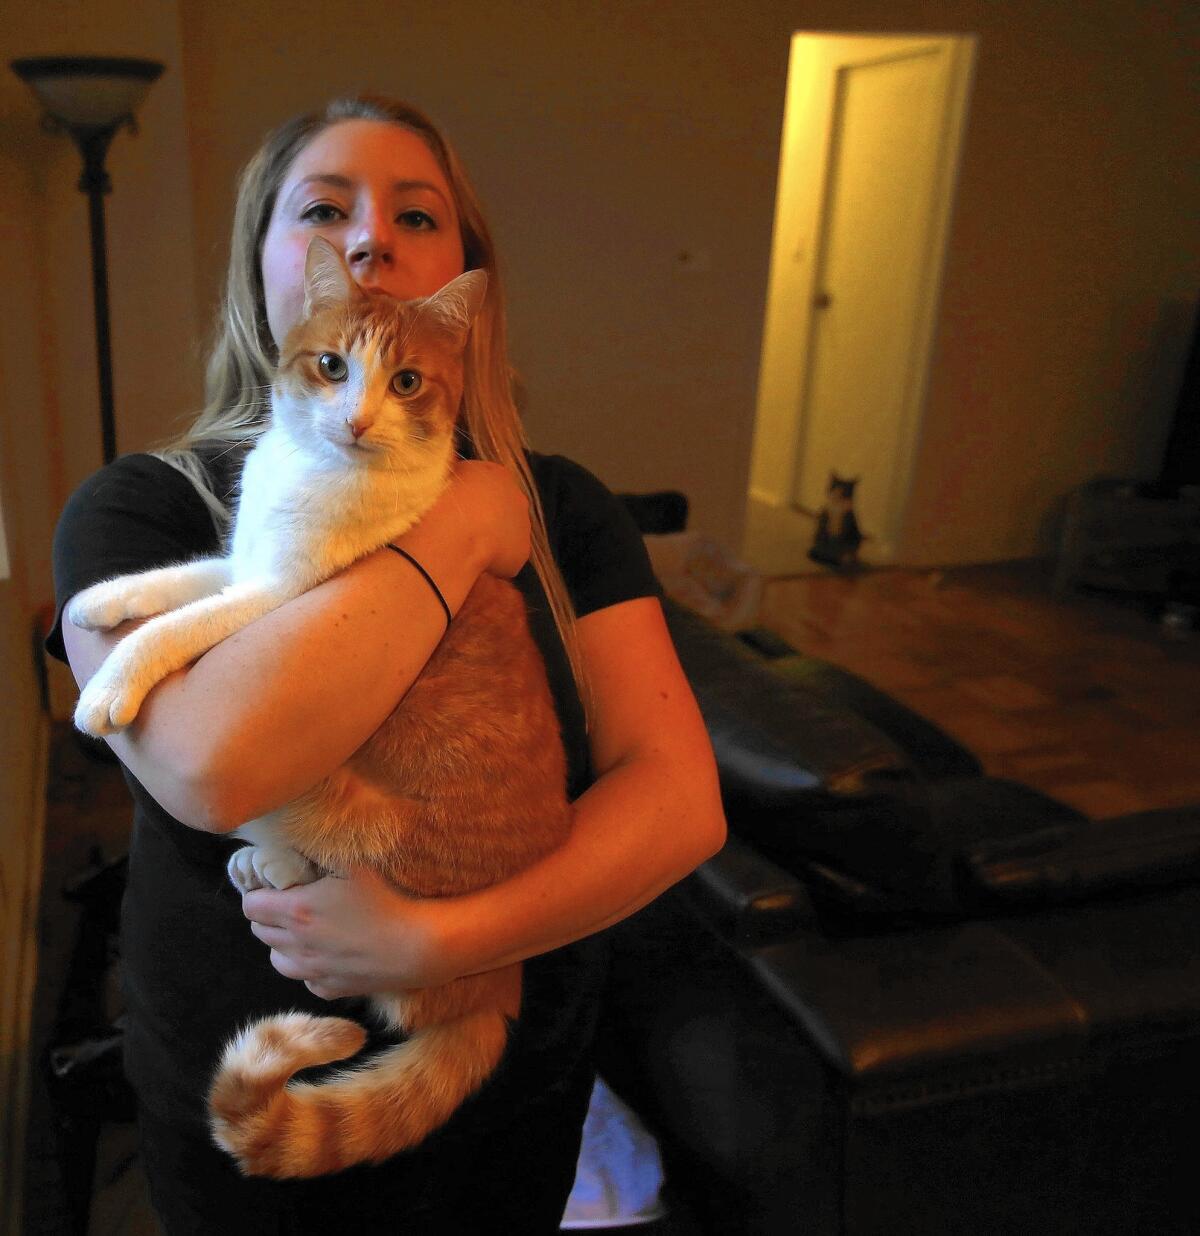 Alissa Kirby holds her cat, Butters. Kirby says she believes a police dog attacked her pet, costing her nearly $1,000 in veterinarian bills.